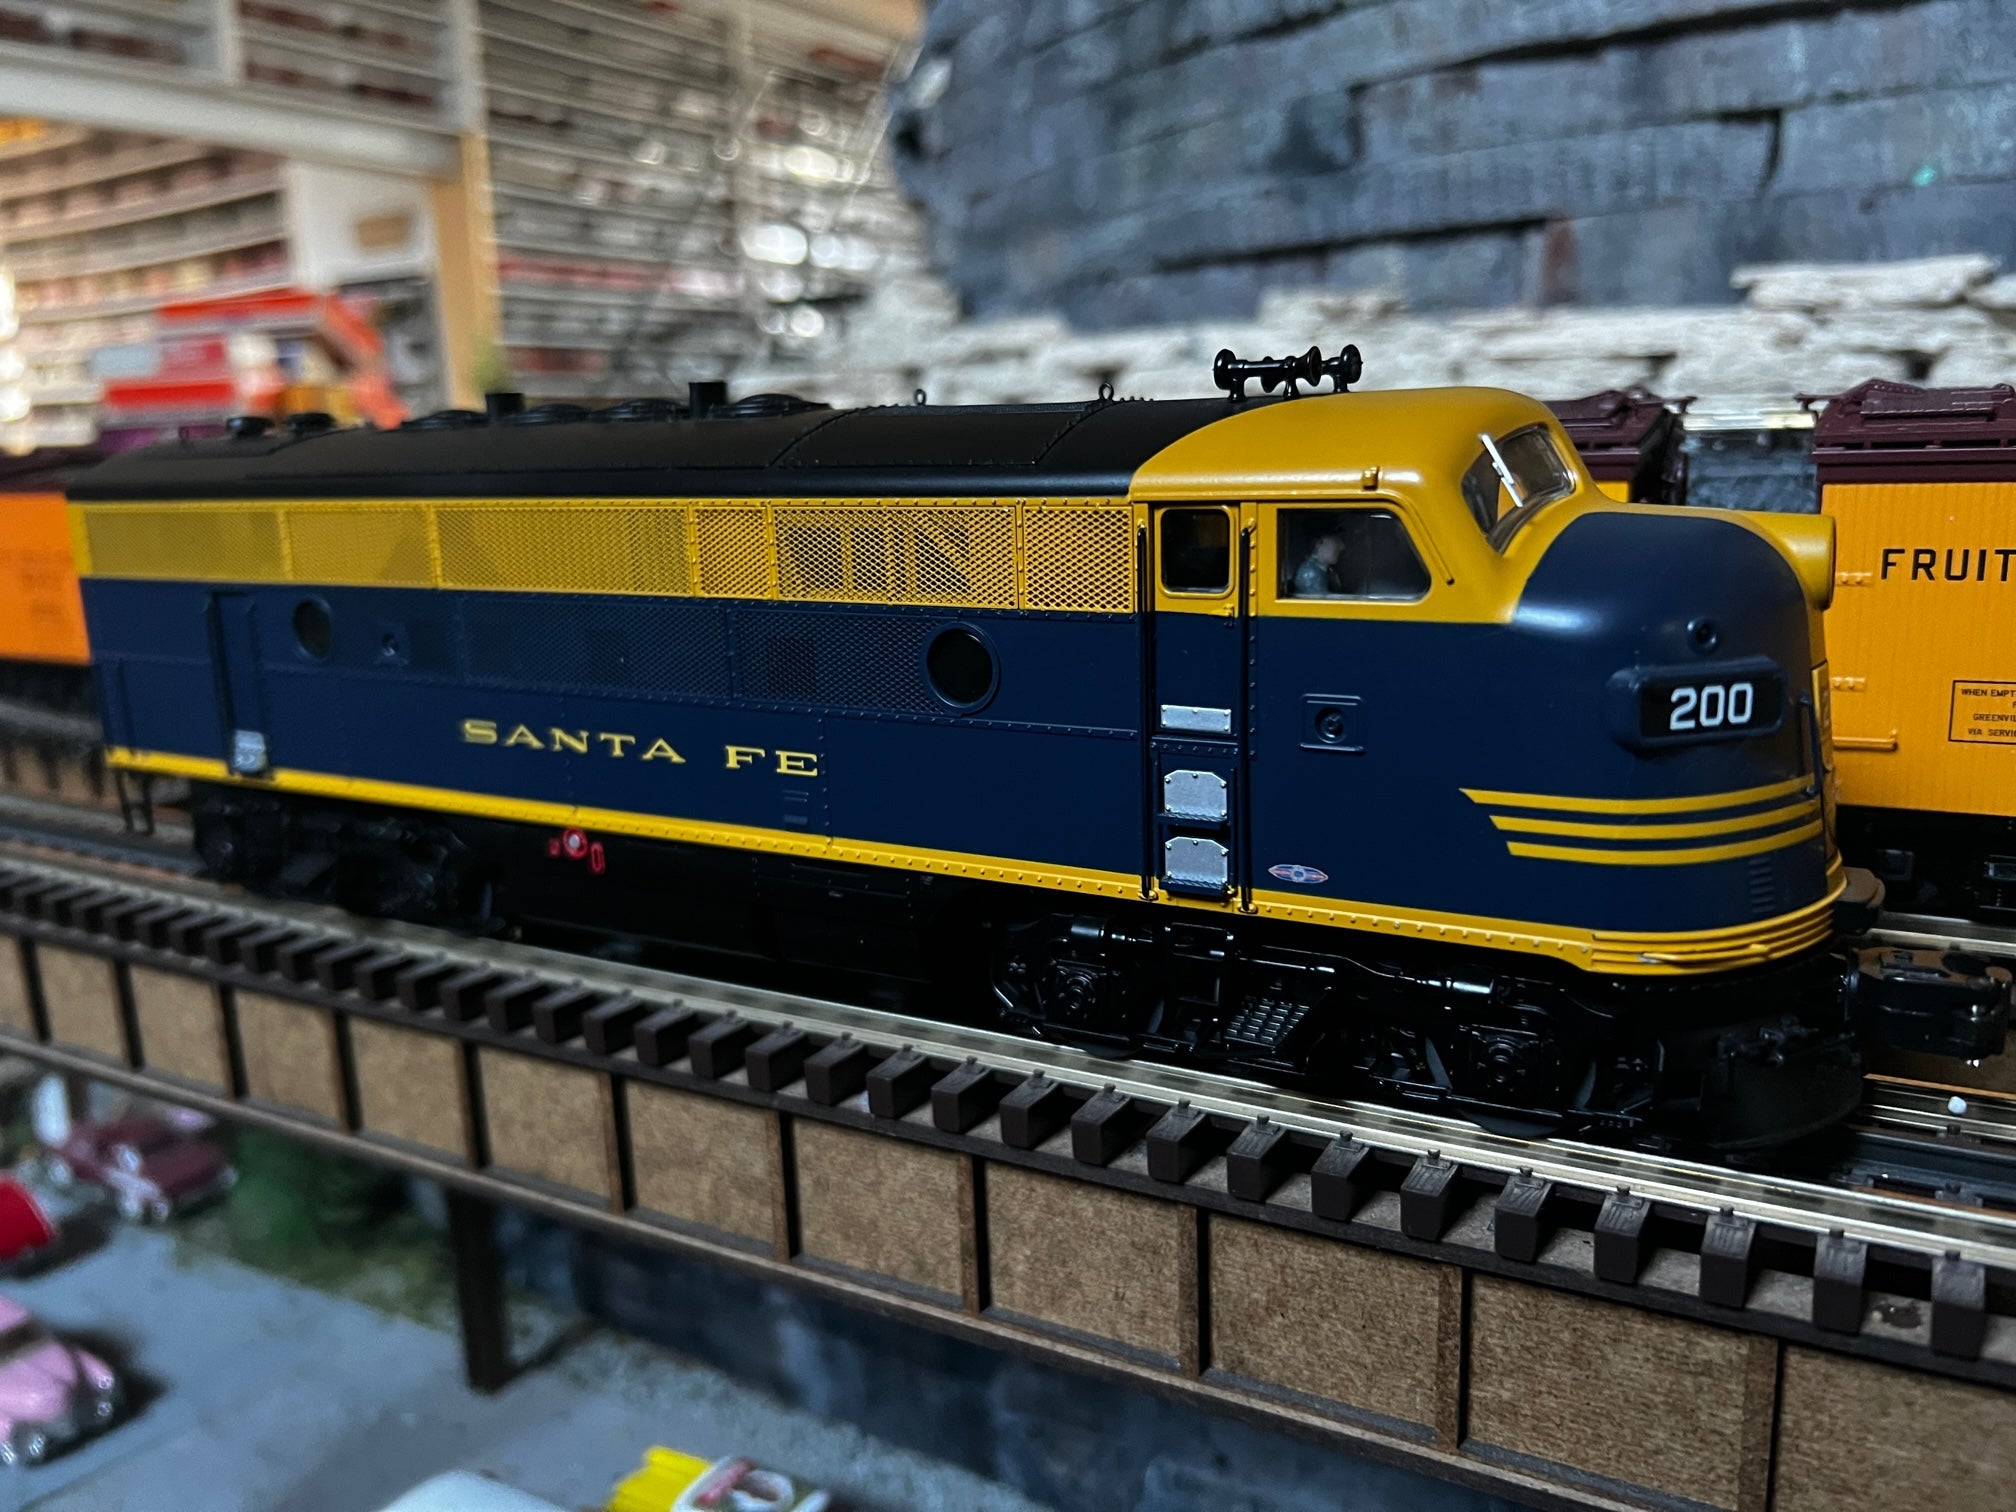 Lionel 6-34635 SANTA FE 'CAT WISKERS' LEGACY F3 A-A DIESELS (PWR #200, DMY #201) Plus 6-34638 Powered B Unit and 6-34639 Unpowered B Unit